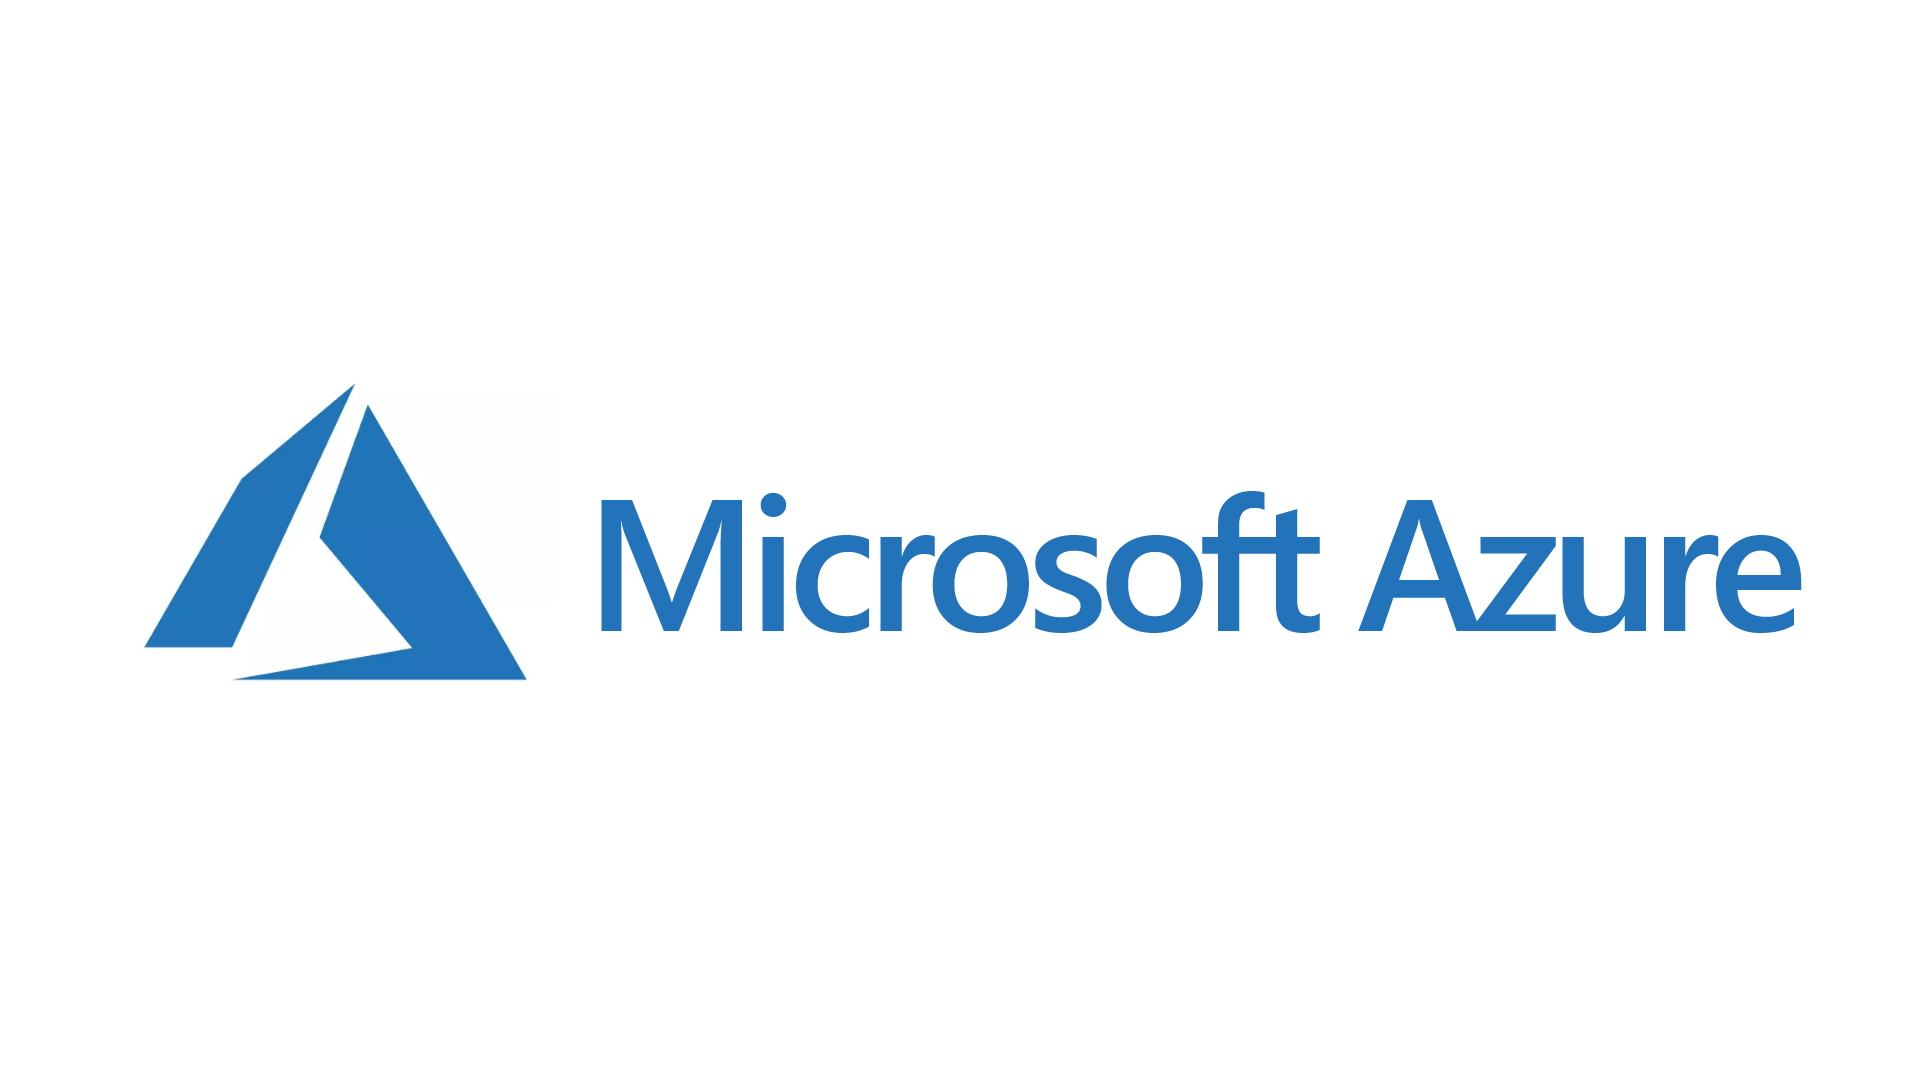 Bounty worth Rs 22 Lakh for a bug in Azure cloud systems